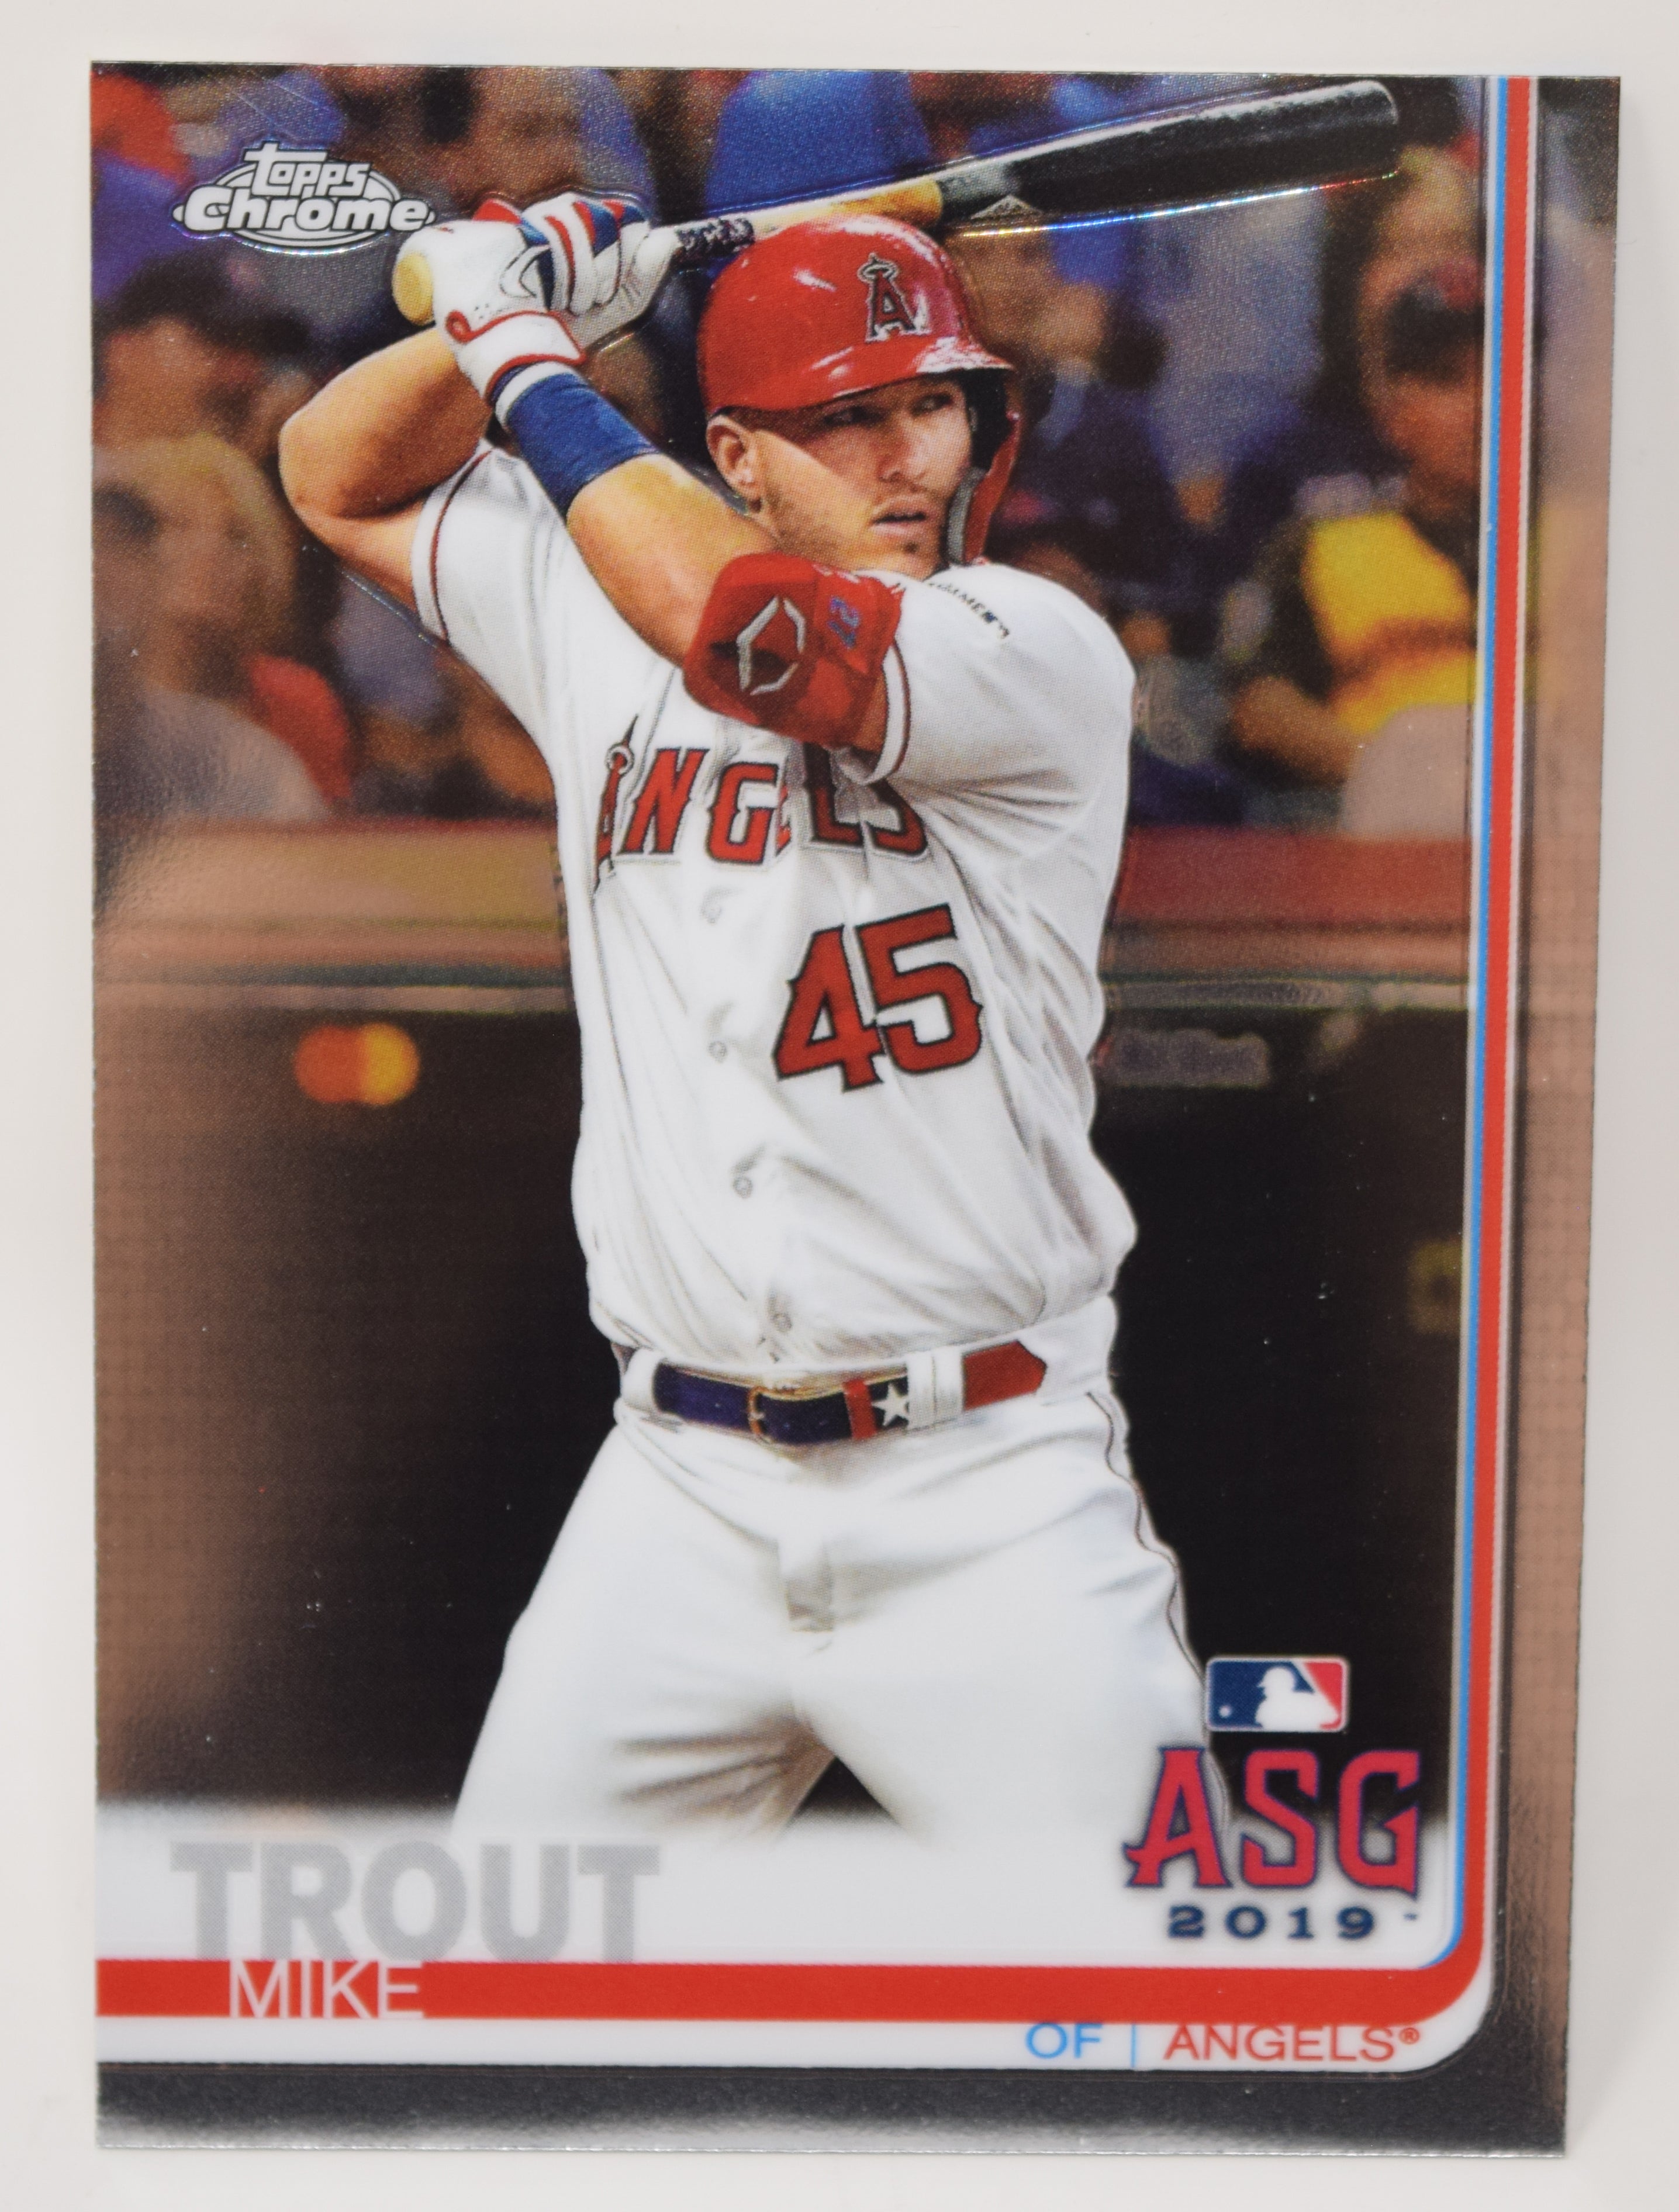  Mike Trout 2015 All-Star Game Special Insert Baseball Card -  2020 Topps Chrome Update Baseball Card #U-69 (Los Angeles Angels) Free  Shipping : Collectibles & Fine Art